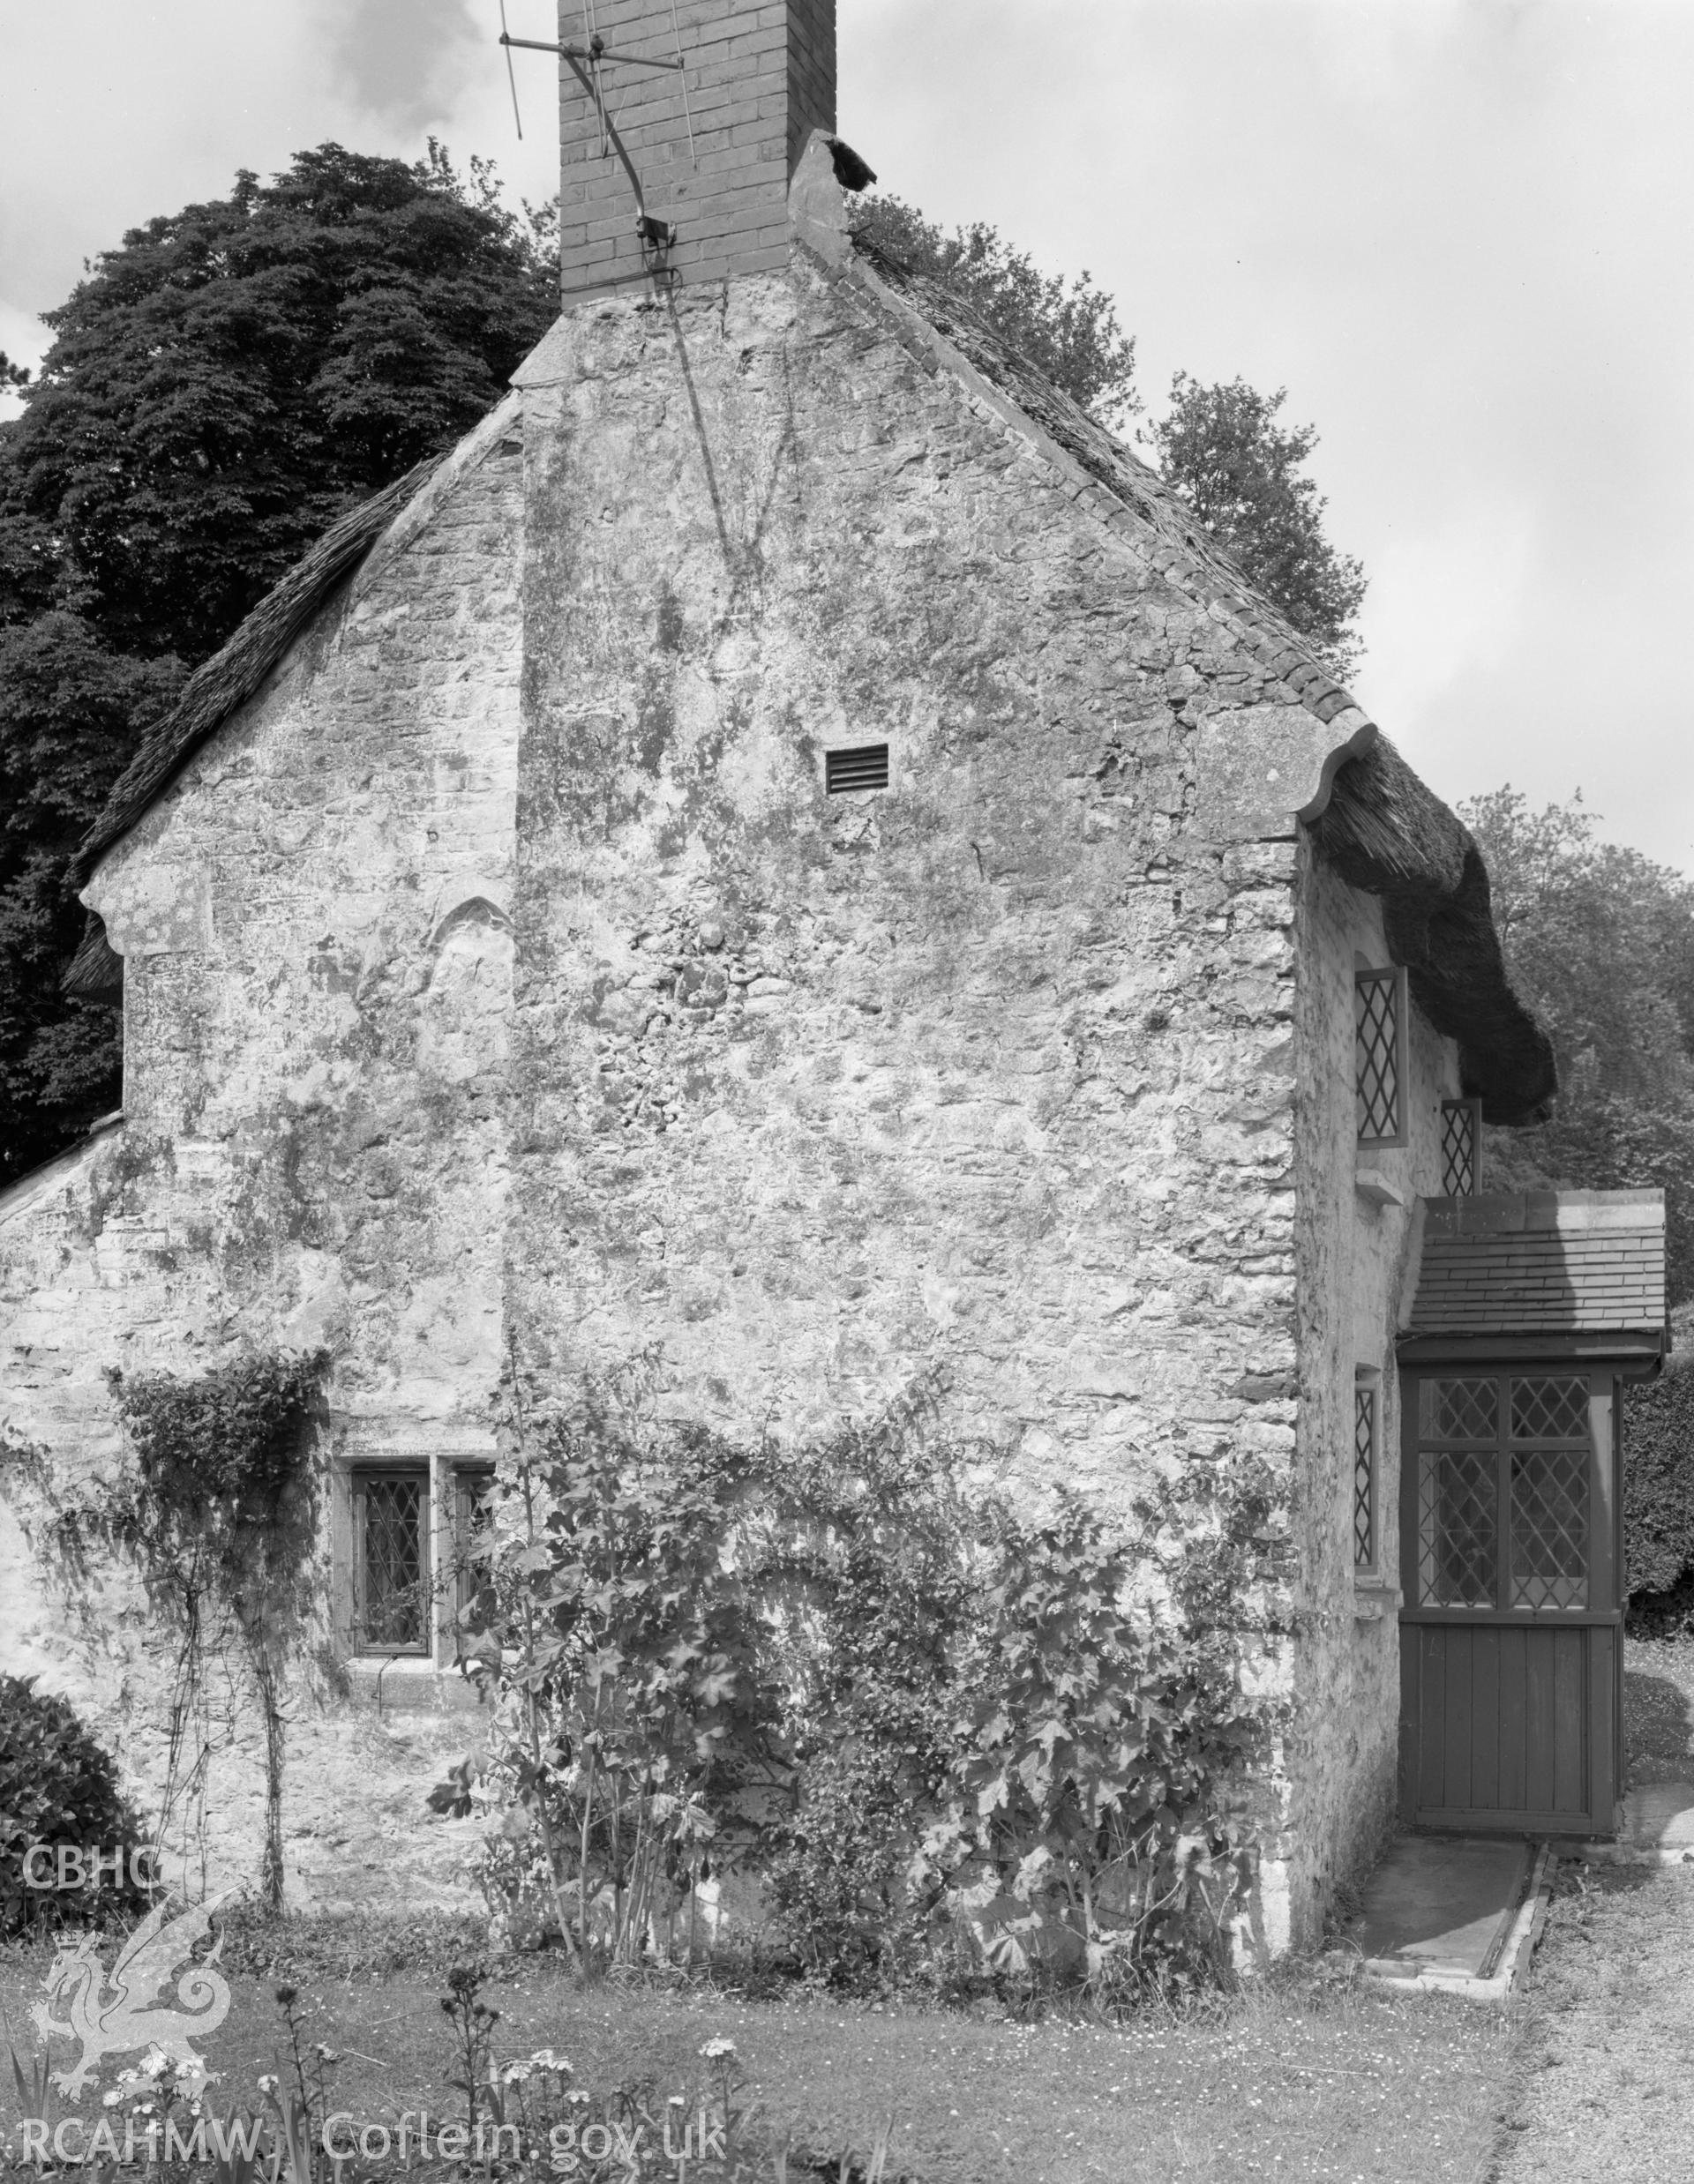 View of the gable end of cottage at St Fagans taken 23.06.65.